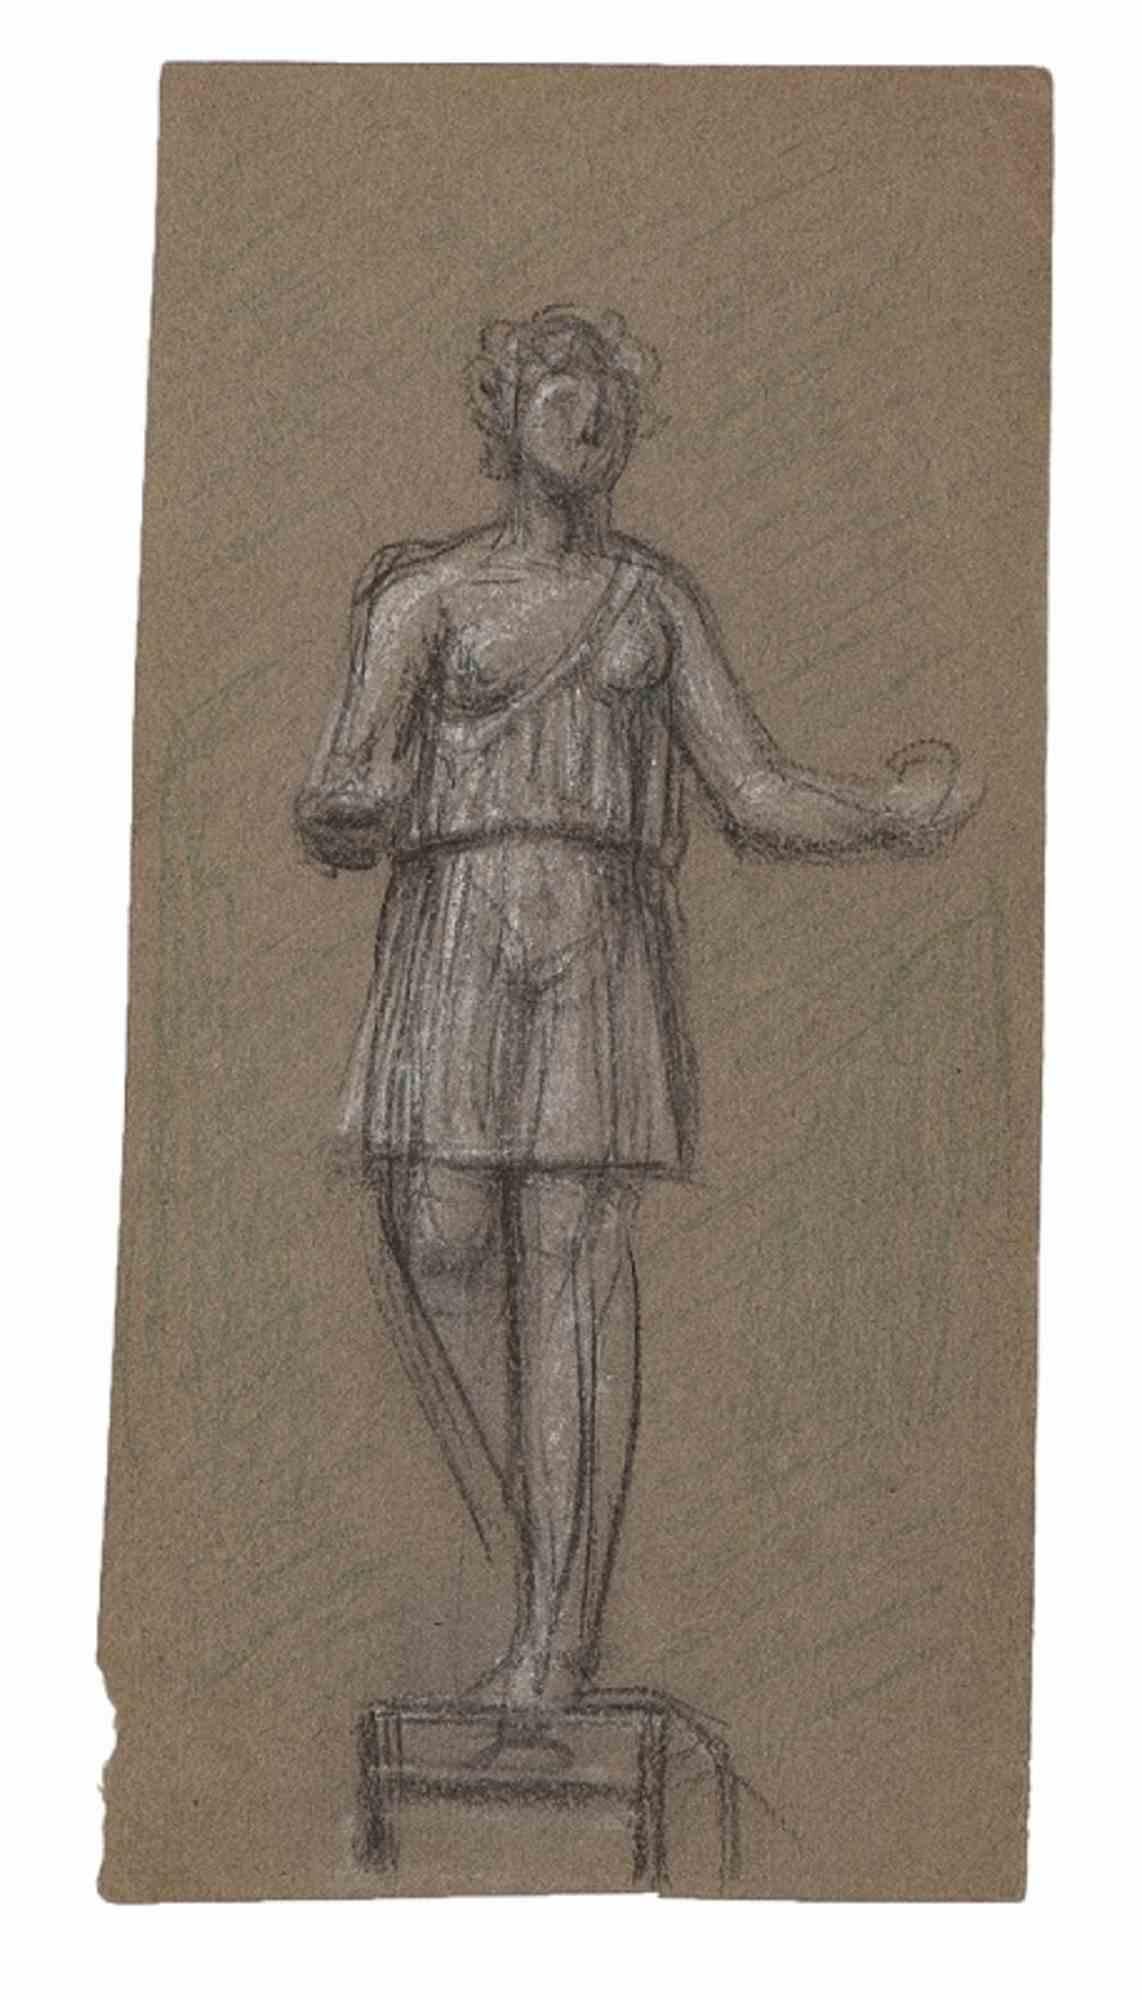 Charles Moulin Figurative Art - Sketch for a Sculpture - Original Drawing - Early 20th Century